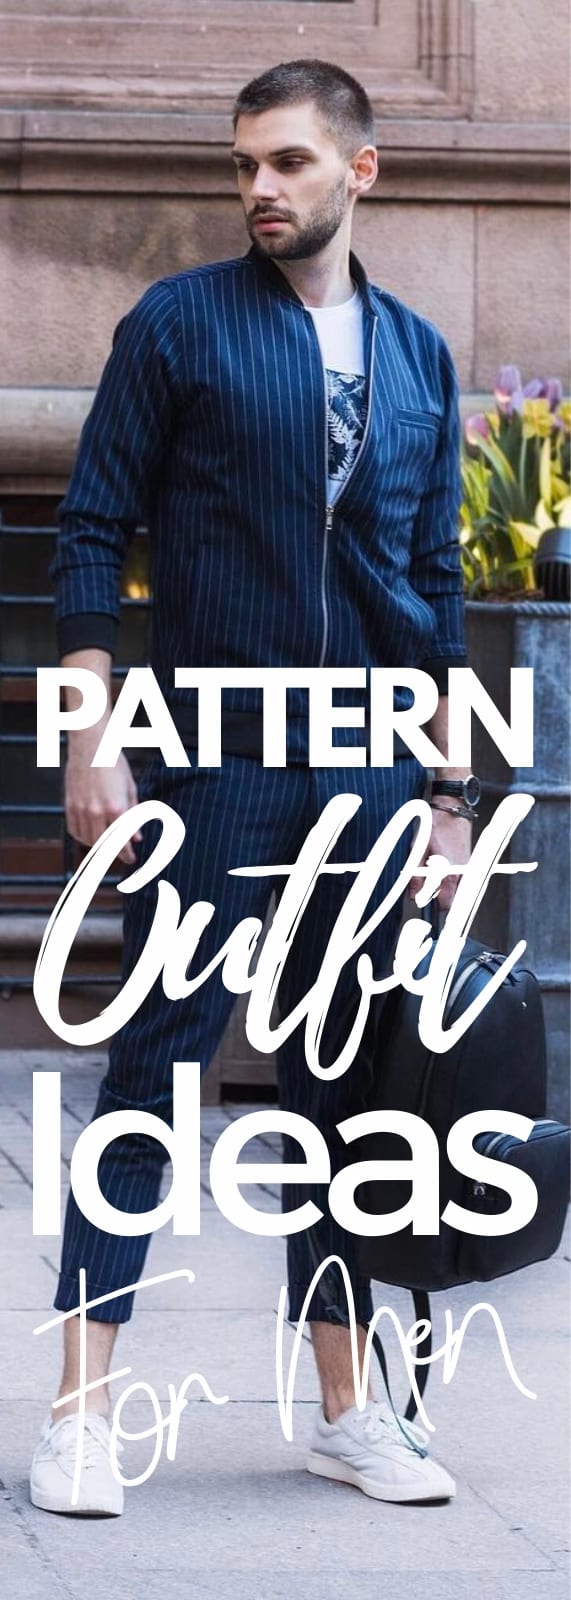 Latest Pattern Outfit Style Trends For Men To Try Now